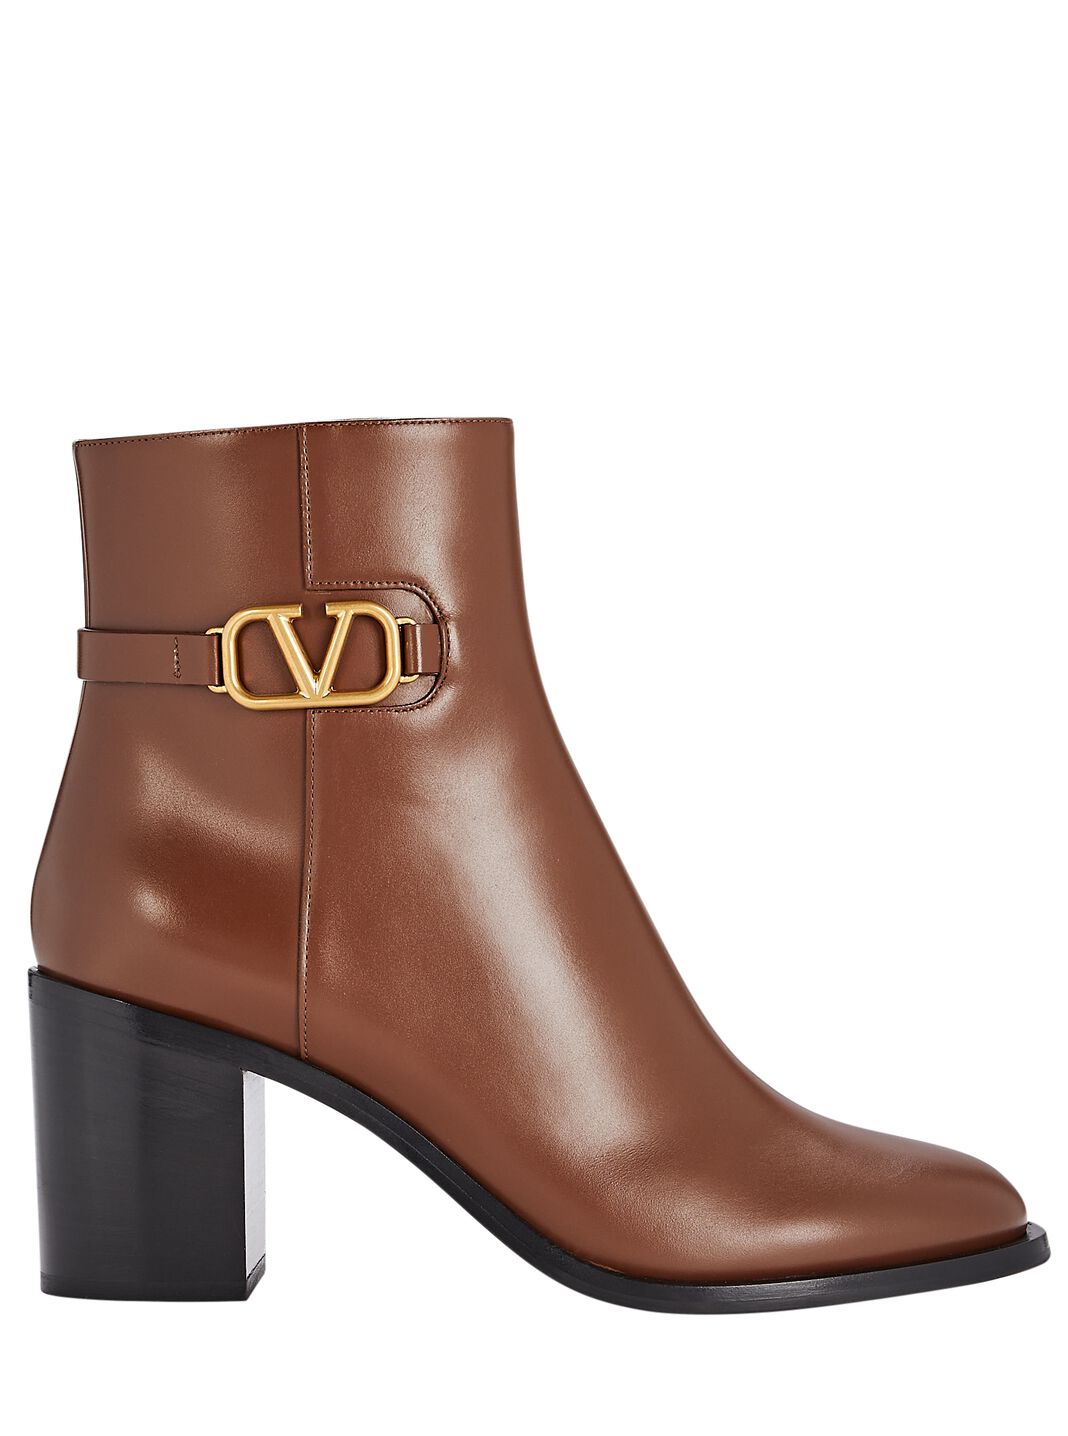 VLogo Leather Ankle Boots